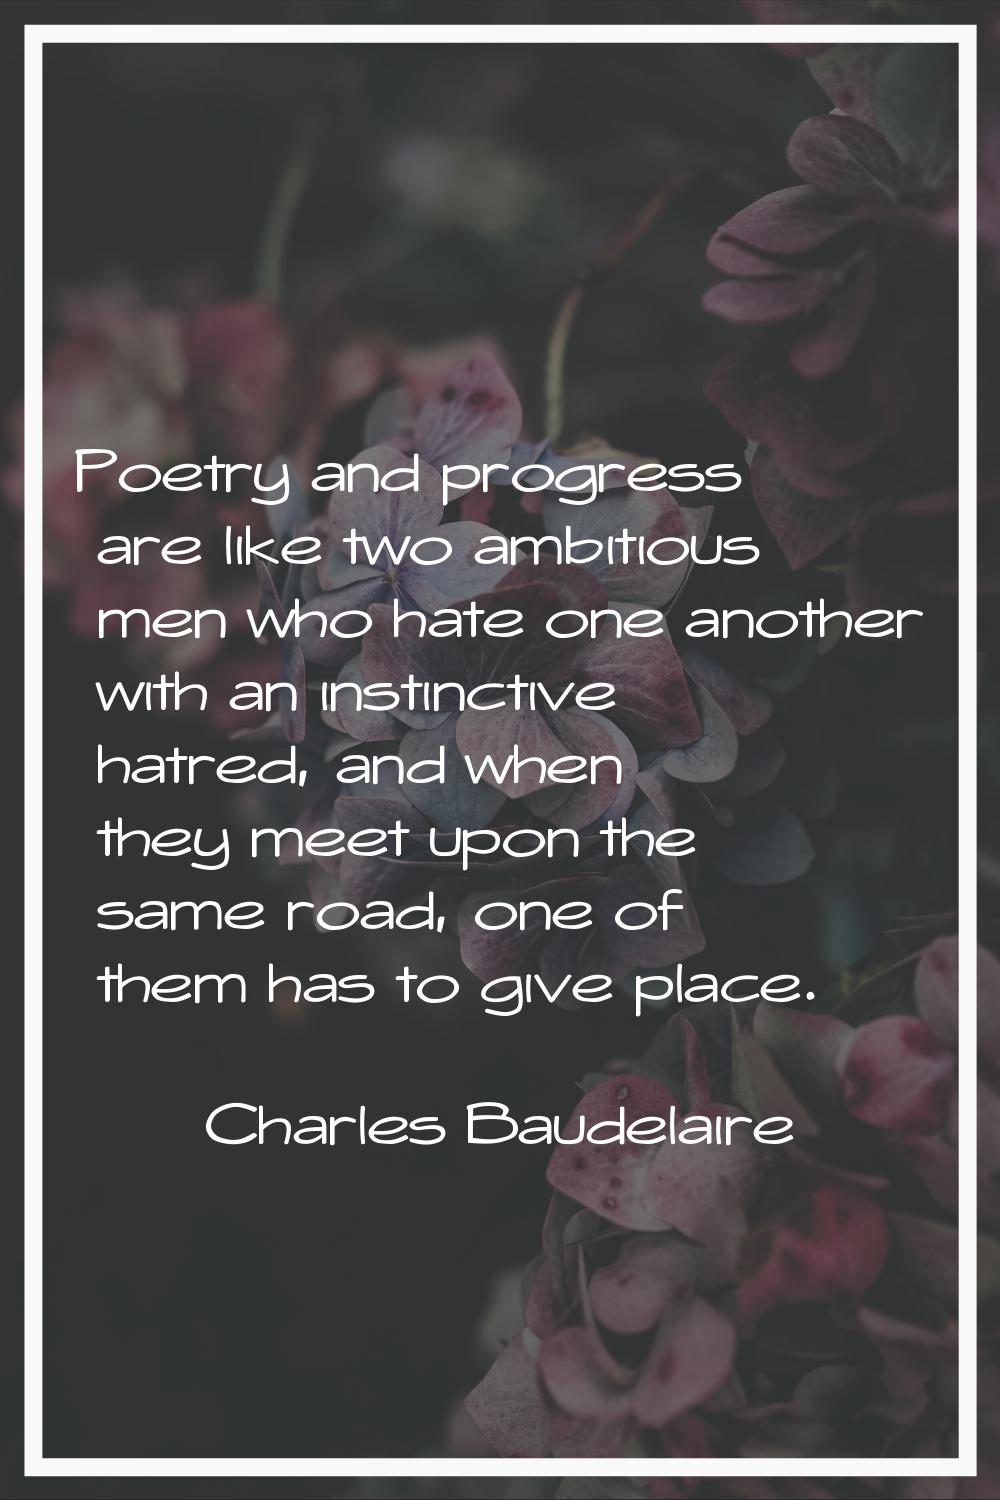 Poetry and progress are like two ambitious men who hate one another with an instinctive hatred, and